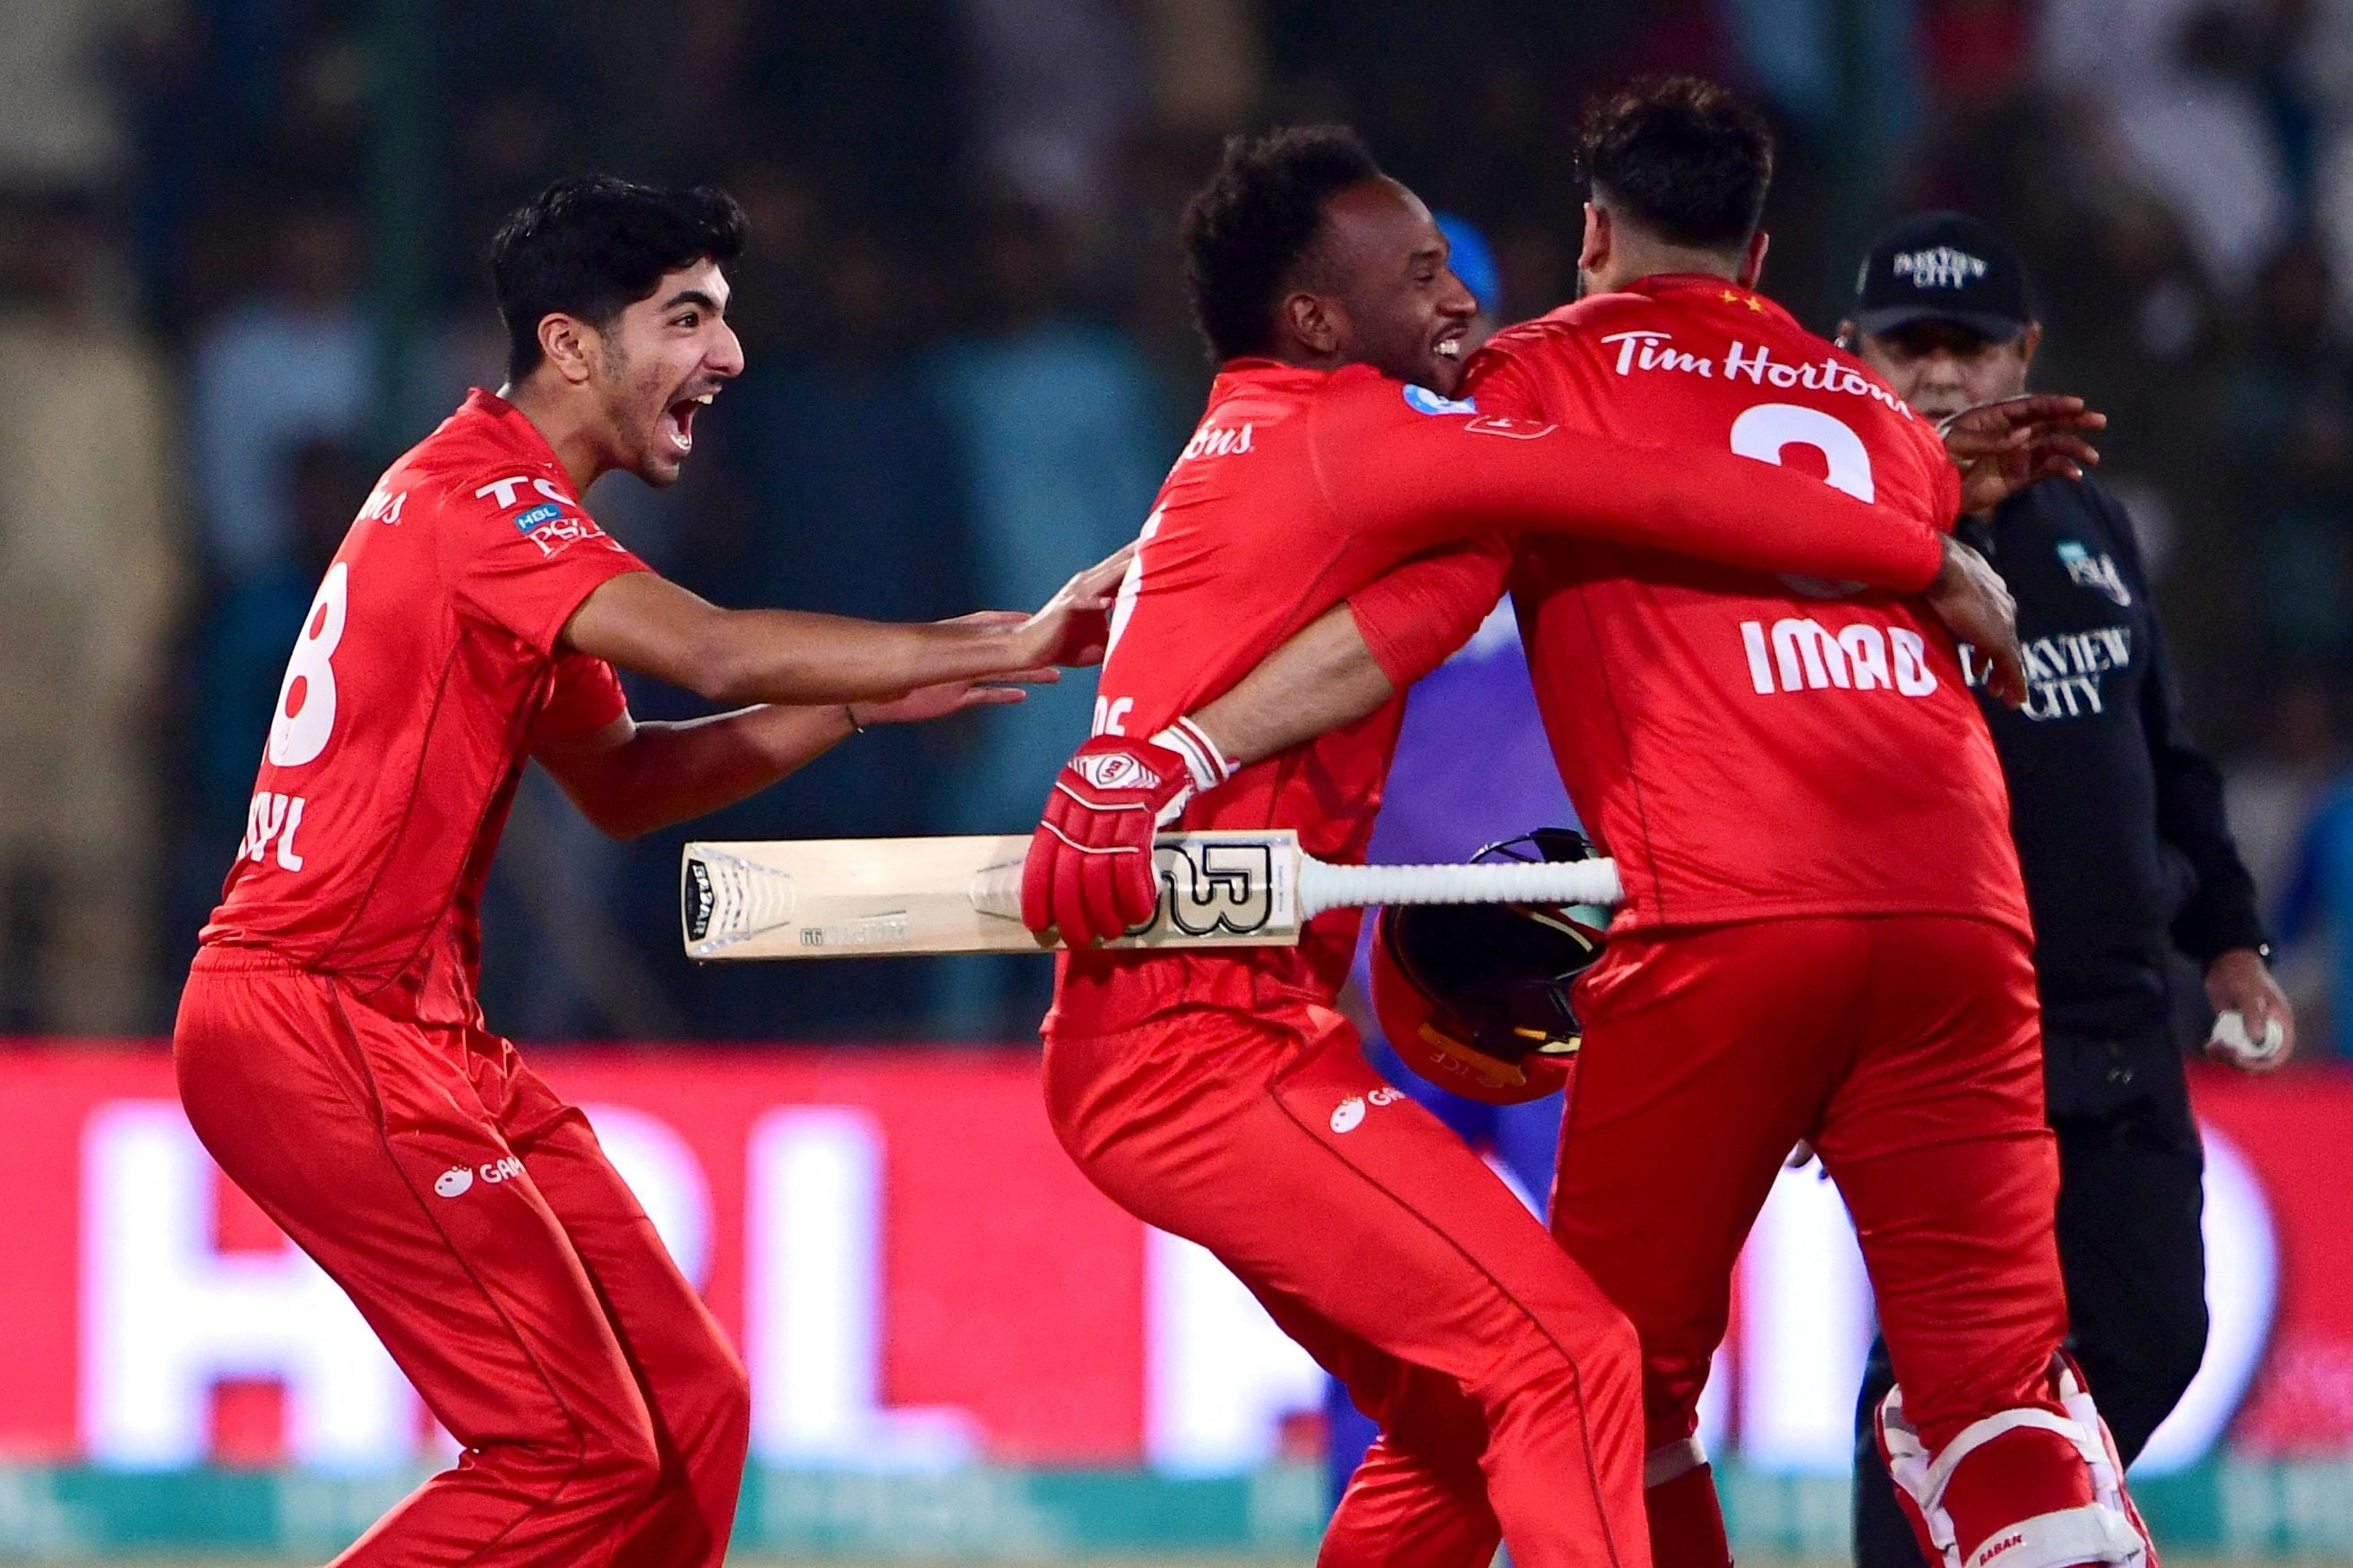 usman khan and muhammad waseem miss out on winners’ medals after epic psl finale